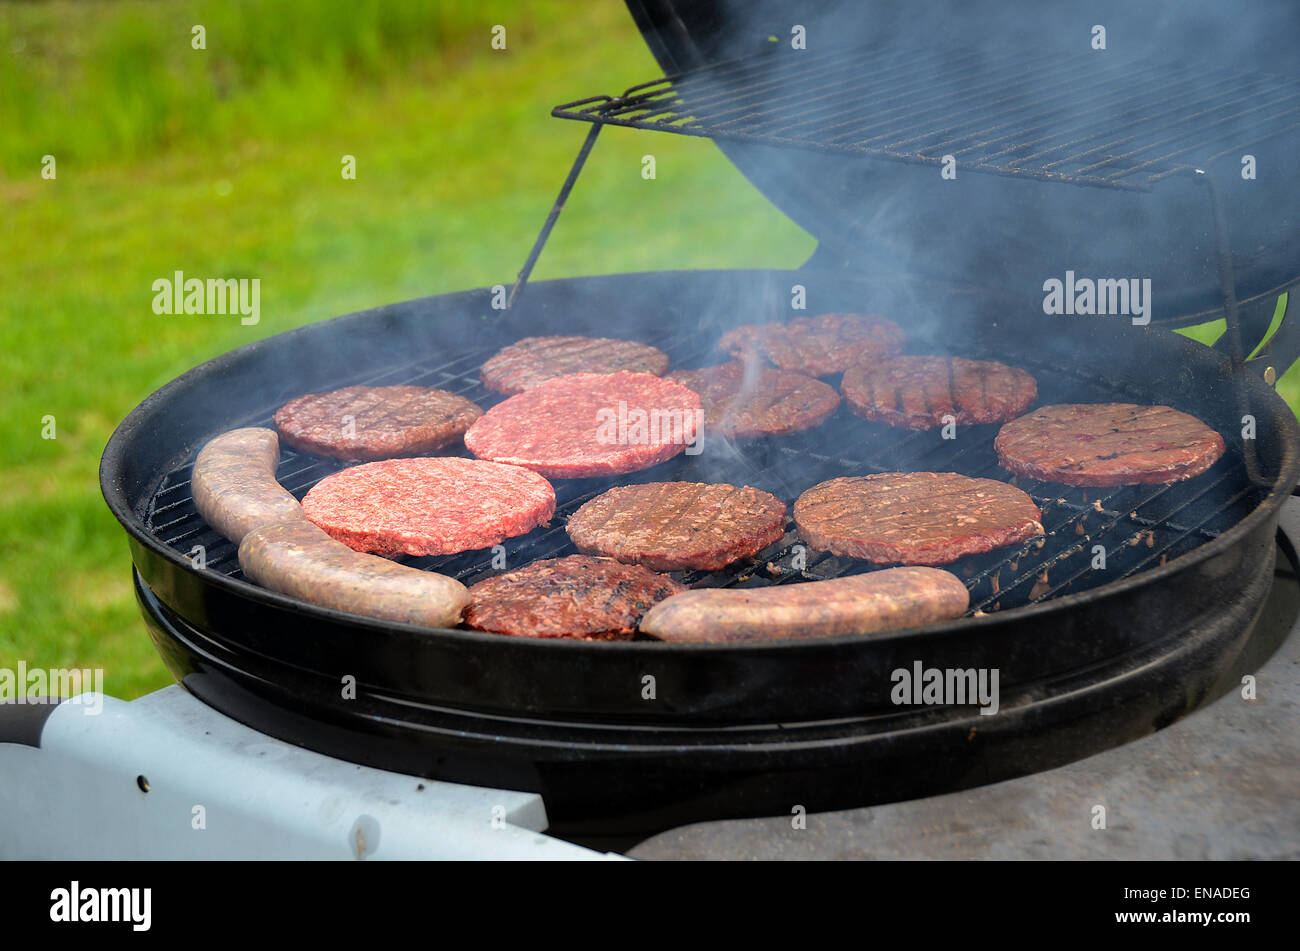 Hamburg patties and bratwursts cooking on a barbecue grill. Stock Photo